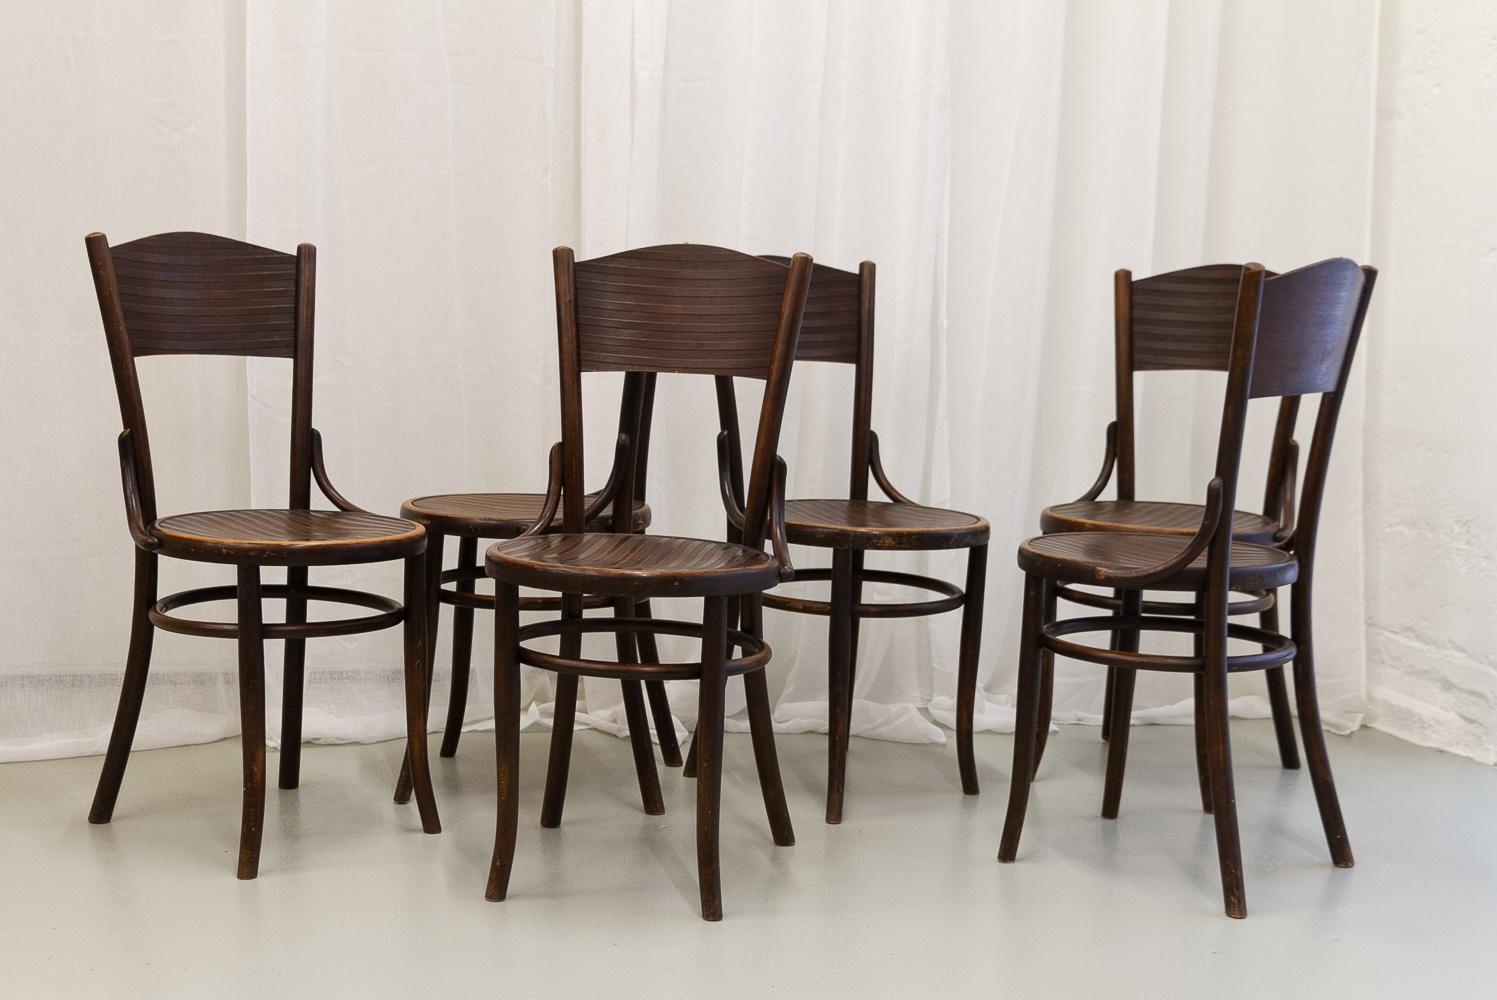 Vintage Fischel Bentwood Bistro Chairs, 1920s. Set of 6.
Set of six Fischel Vienna dining chairs in bentwood with striped pattern on seat and backrest.
These Art Nouveau cafe chairs are model 45 and were made in the Czech Republic in the 1920s. They